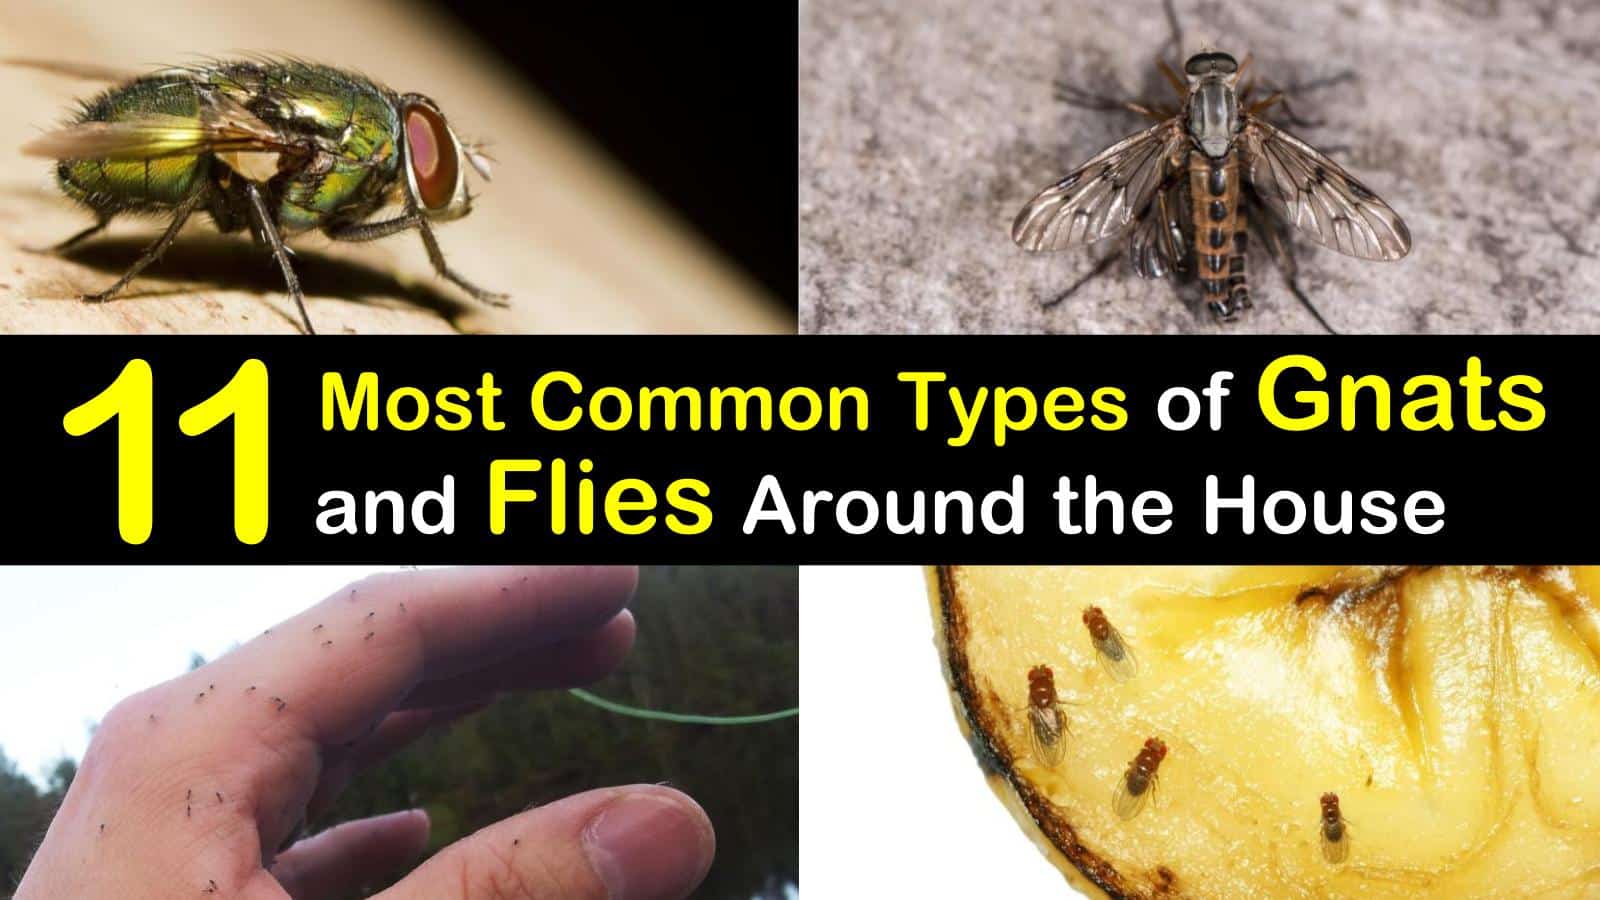 11 Most Common Types of Gnats and Flies Around the House titleimg1